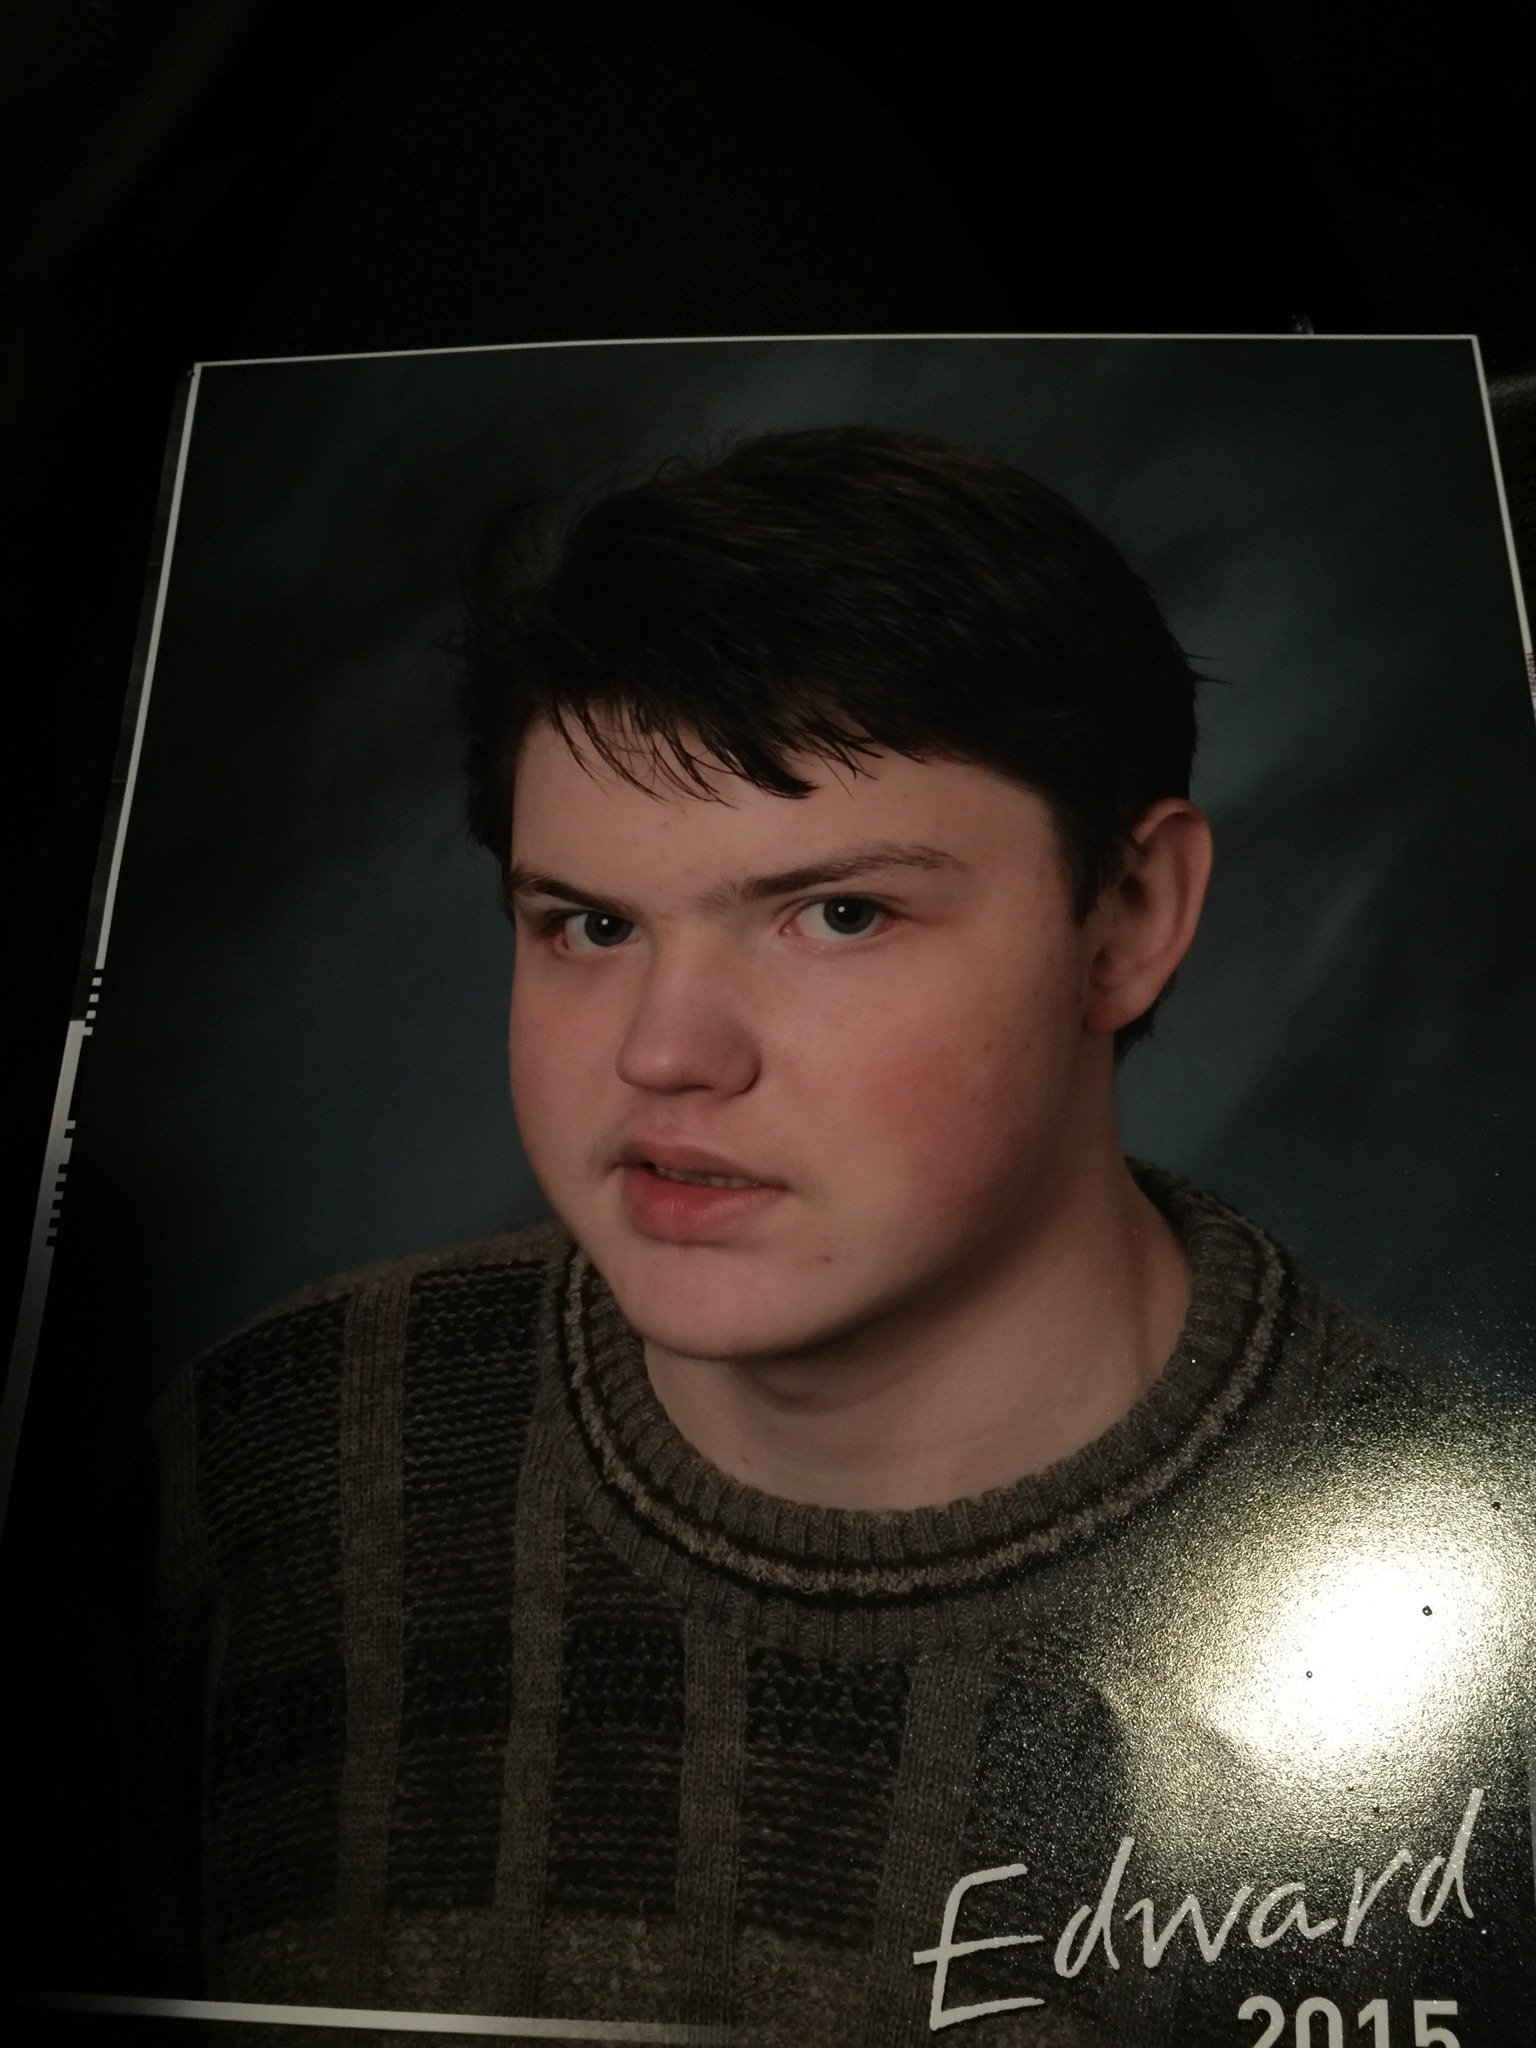 ﻿The Vancouver Police Department is asking for the public's help finding Eddie Hawks, 16, who is on the autism spectrum. Hawks was reported as missing Friday evening, and last seen in the area of Northeast 112th Avenue and Northeast Ninth Street.